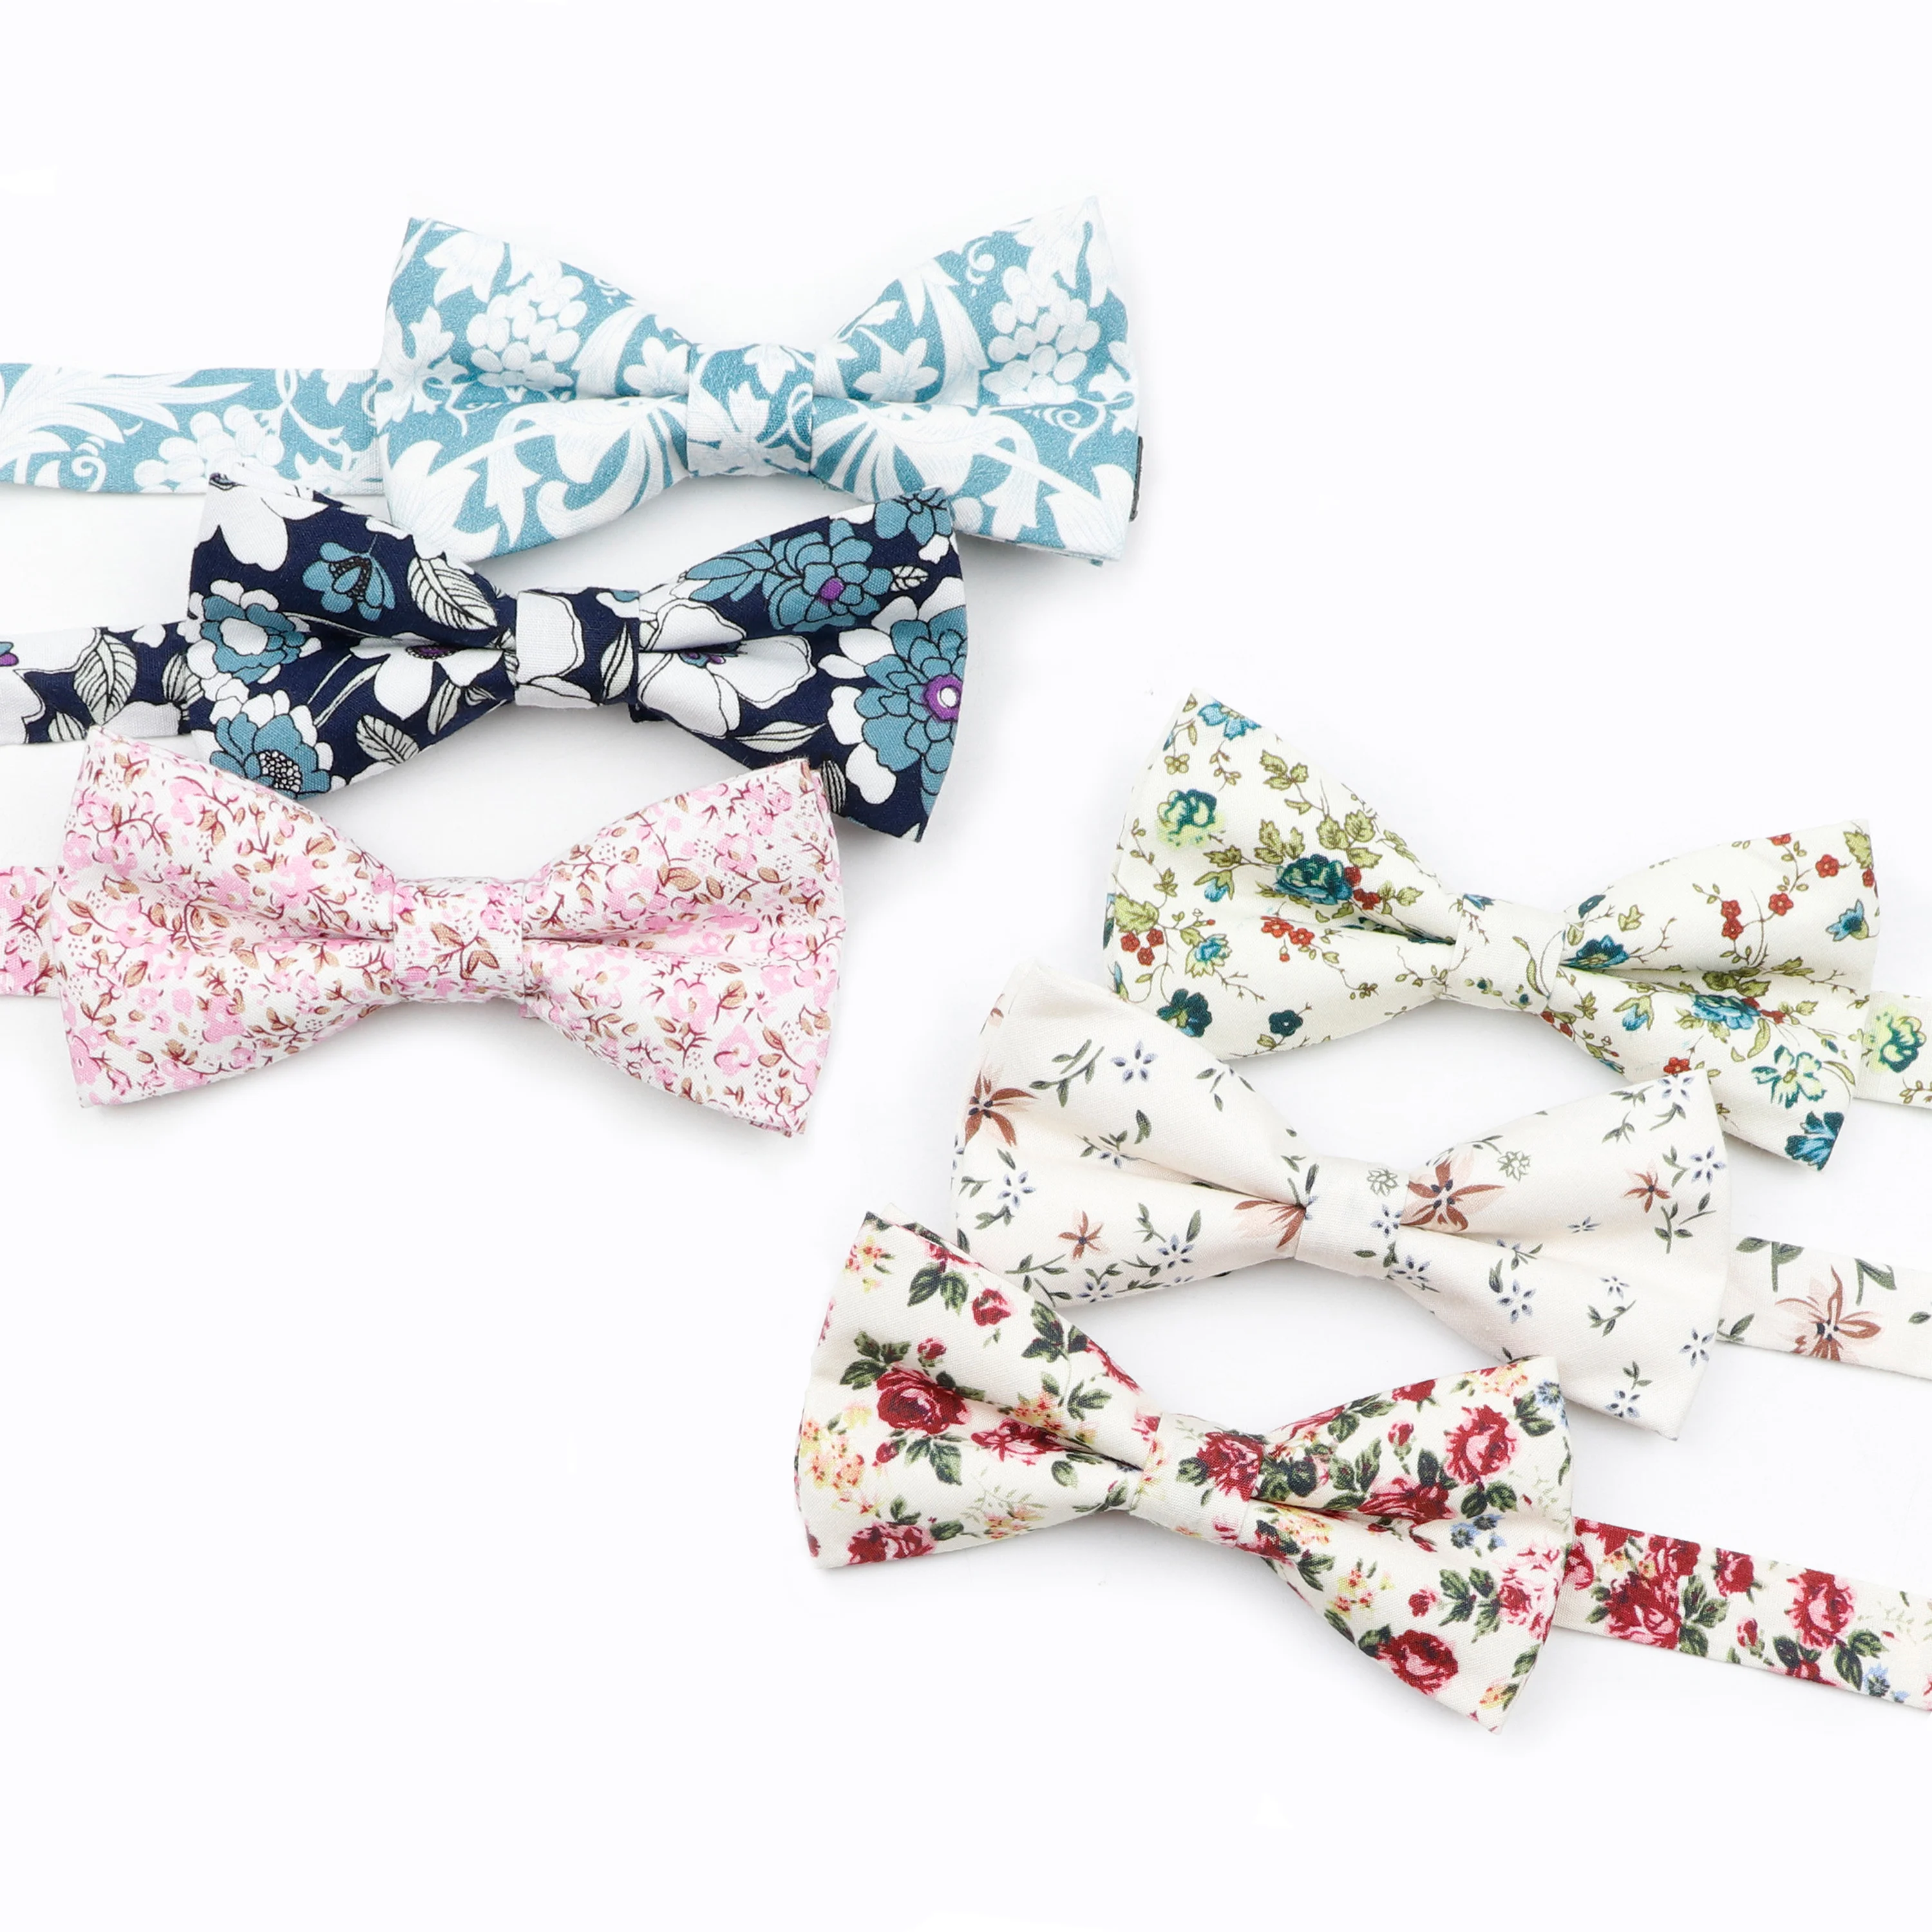 Floral Bow Tie Cotton Neckties For Men Wedding Party Colorful Butterfly Bowtie A 